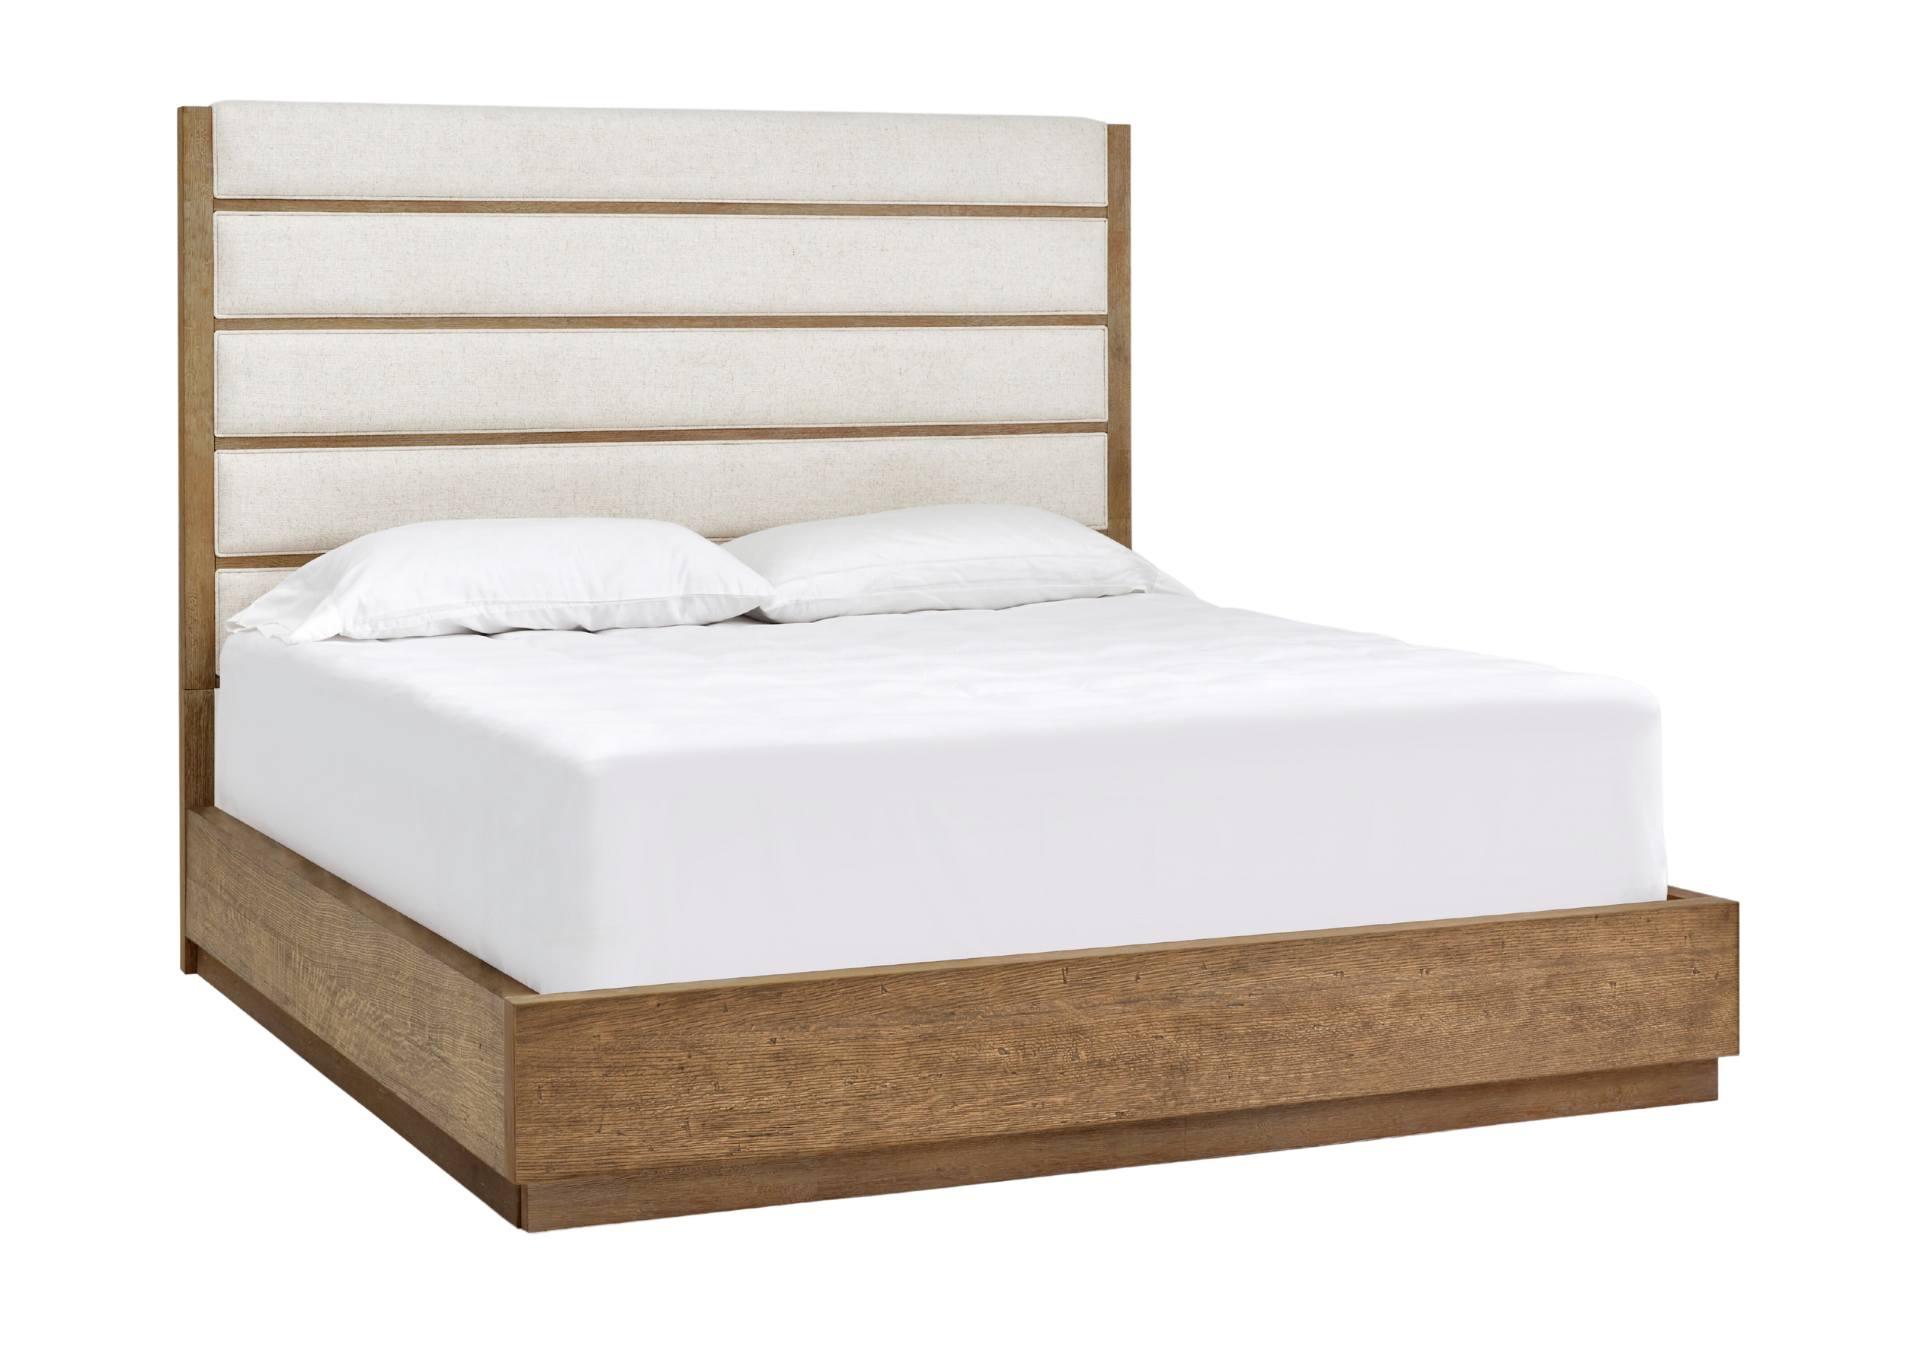 AMHERST LIGHT OAK QUEEN UPHOLSTERED BED,MAGS